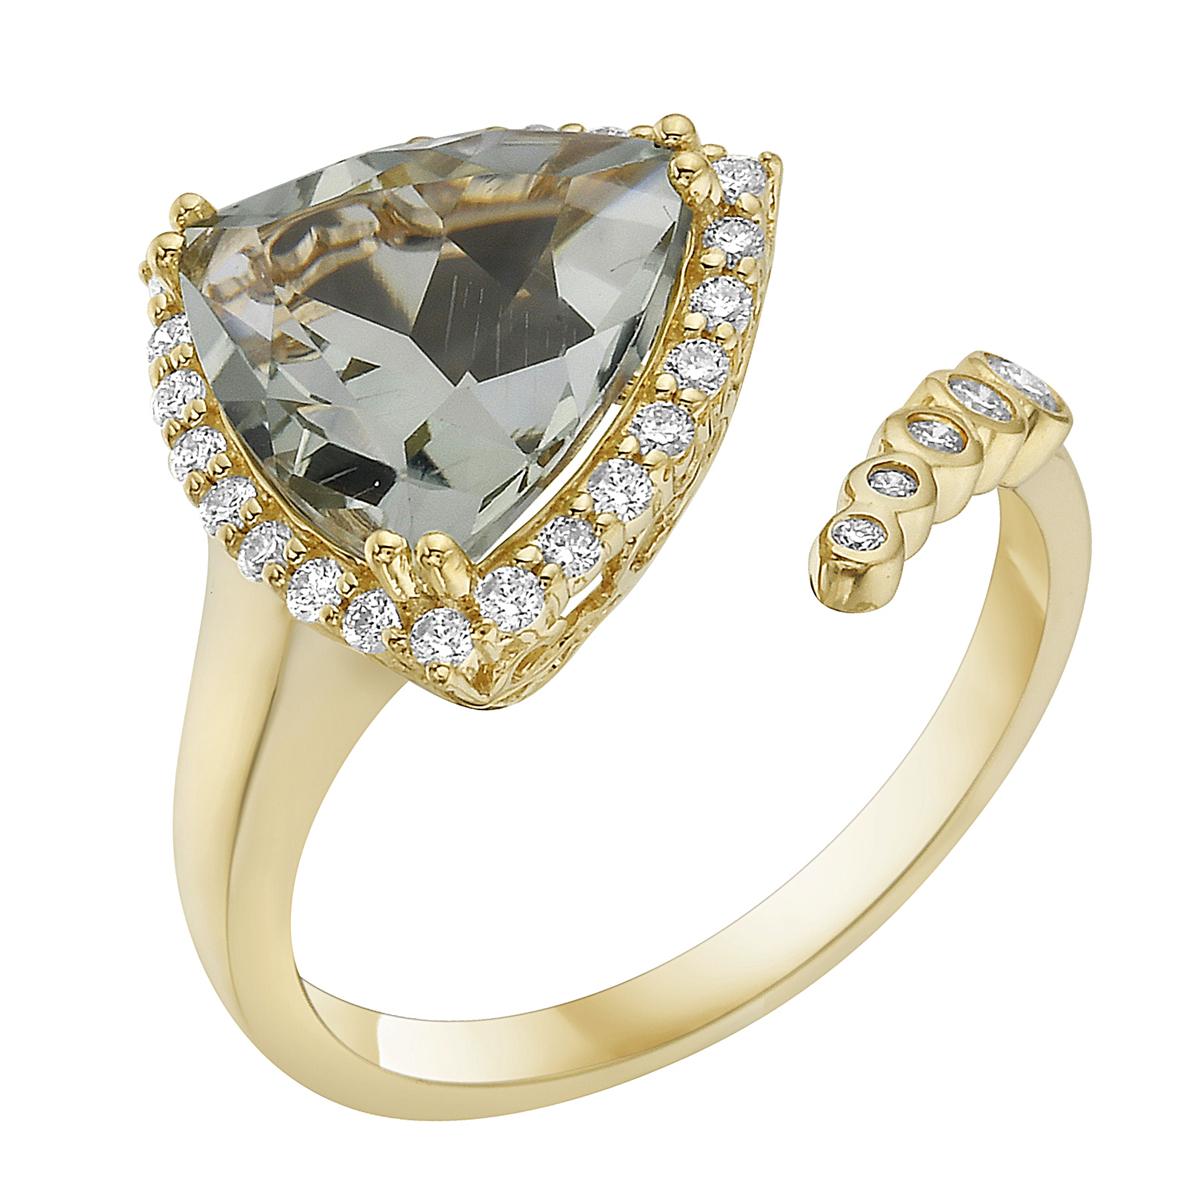 With this exquisite semi-precious mint green quartz yellow gold bypass diamond ring, style and glamour are in the spotlight. This 14-karat trillion cut ring is made from 3.1 grams of gold, 1 mint green quartz totaling 3.11 karats, as well as 29